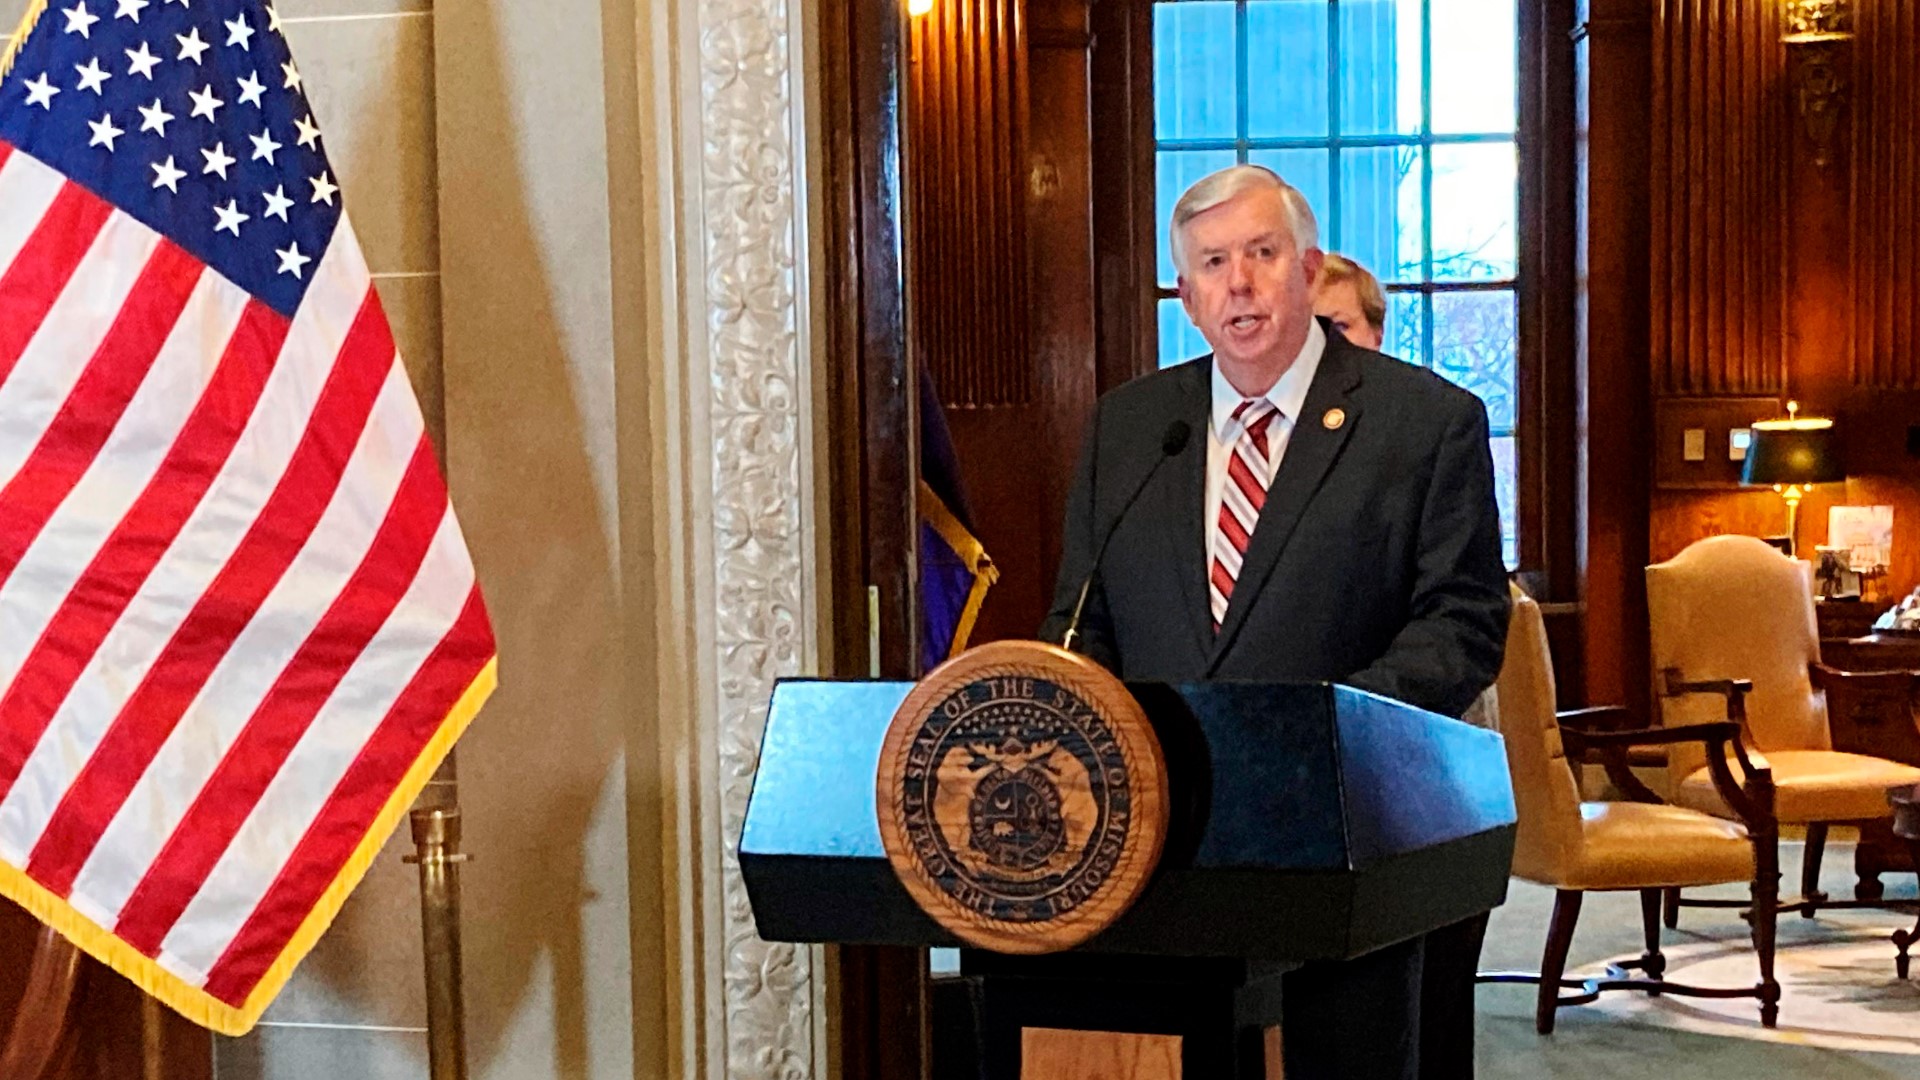 Parson, who signed the nation's most restrictive abortion ban into law, now says attorneys should defer to patients and doctors on medical emergencies in pregnancy.